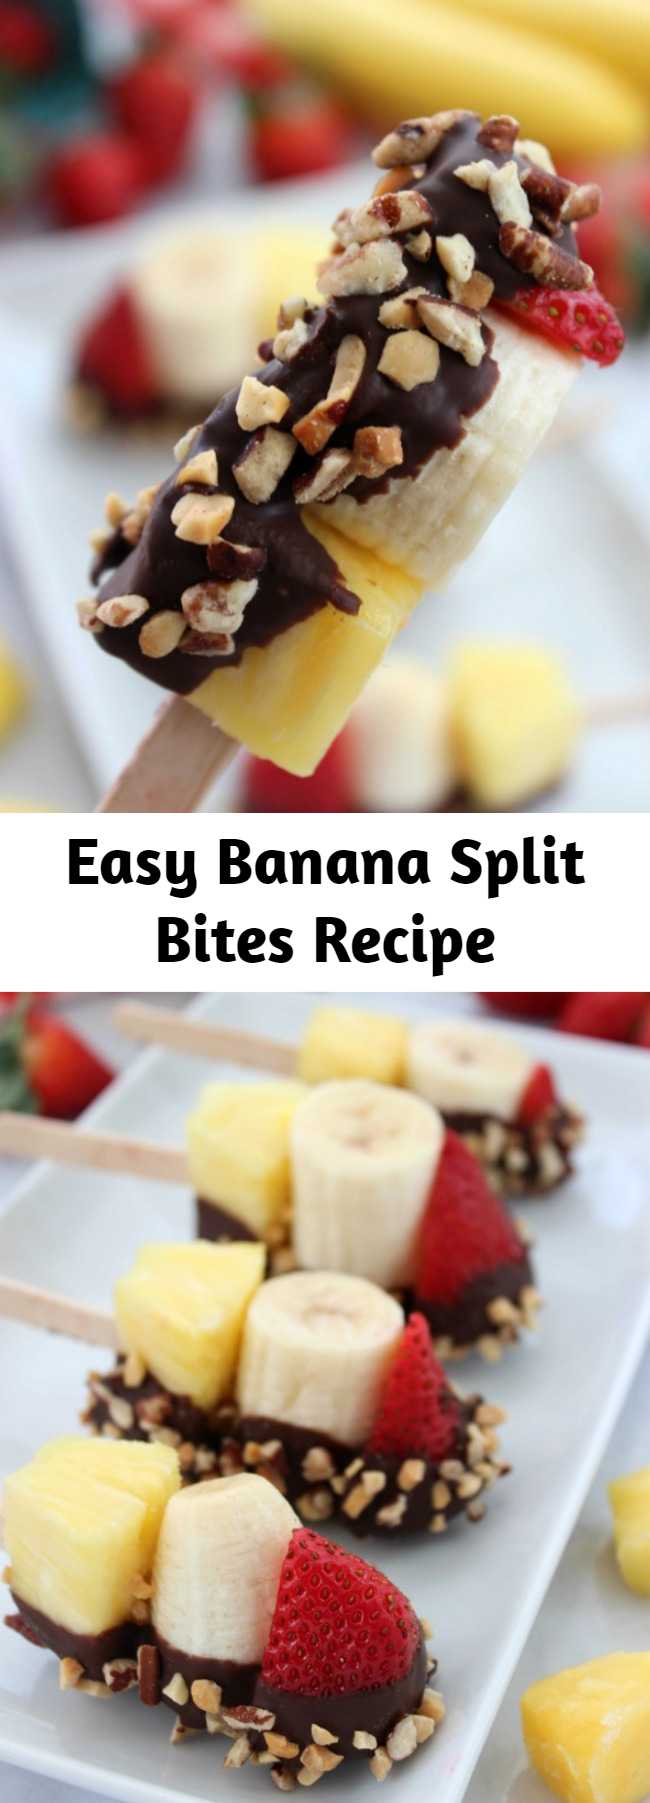 Easy Banana Split Bites Recipe - These Banana Split Bites place a fun and simple twist on your favorite summer treat. Just place Strawberries, Pineapple and Banana on a stick. Then add on some chocolate dipping and nuts! Bam! You have a fun summer time treat.